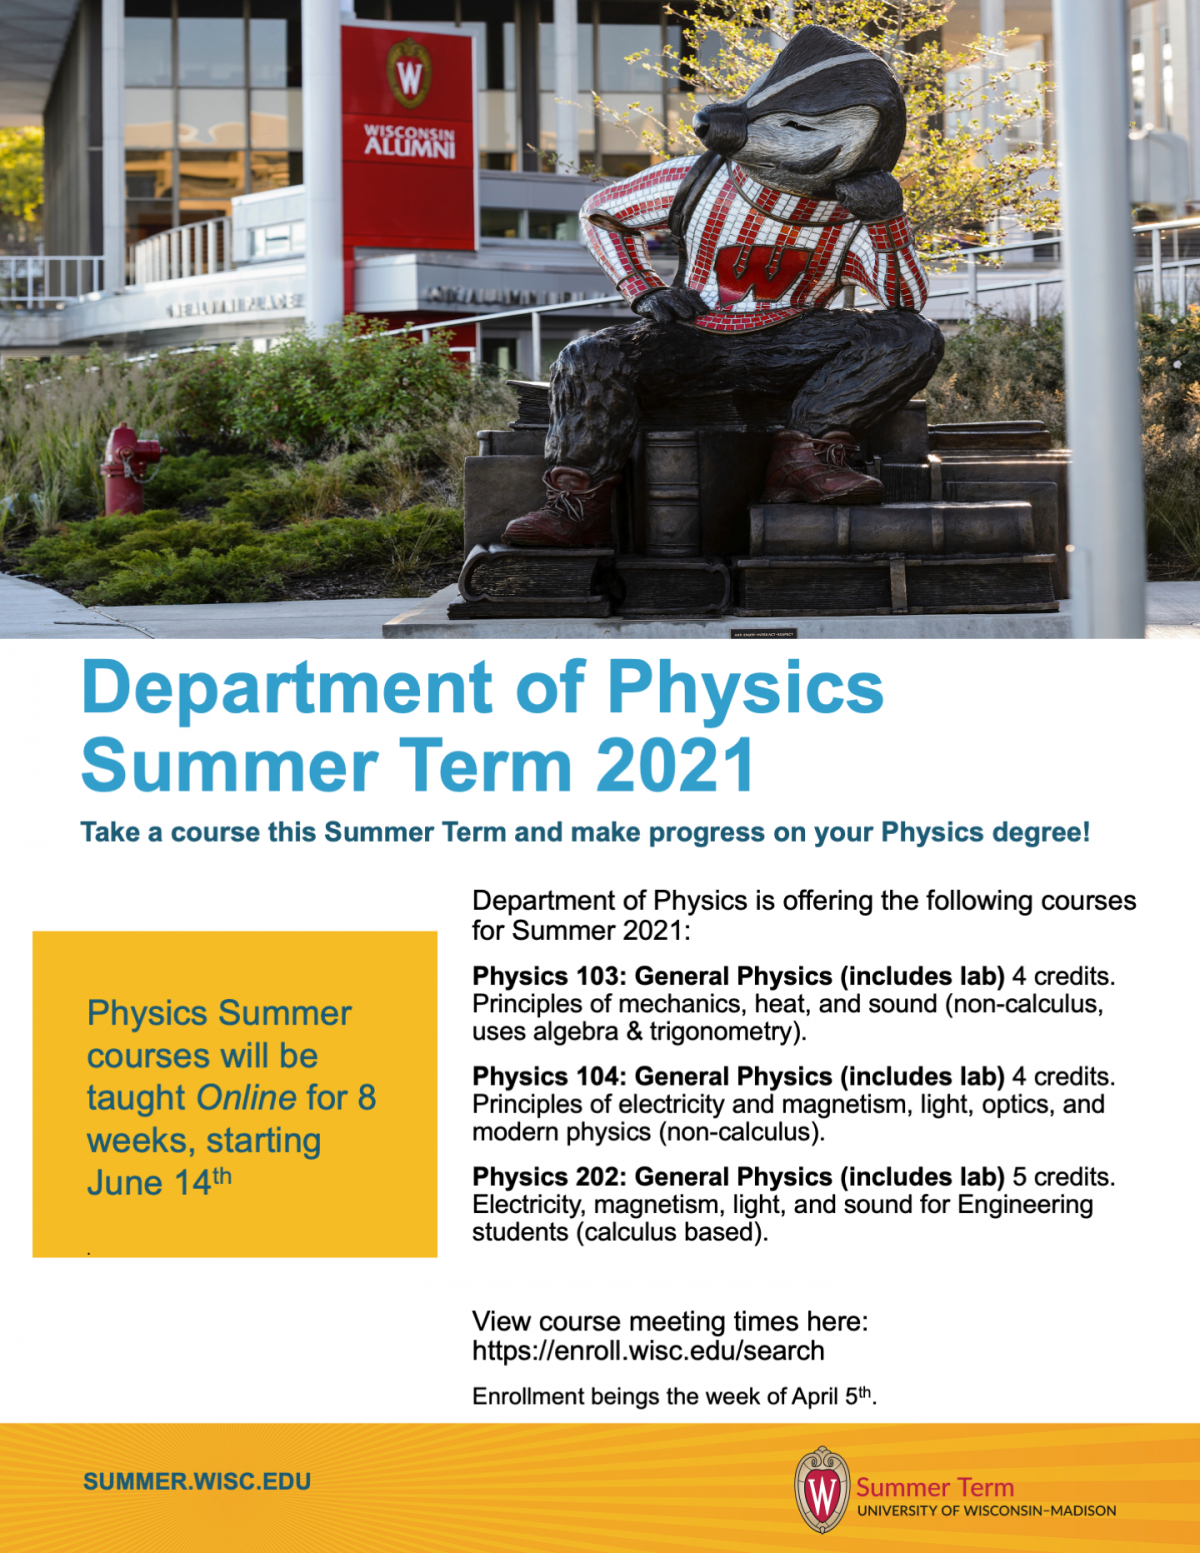 image says: Department of Physics is offering the following courses for Summer 2021: Physics 103: General Physics (includes lab) 4 credits. Principles of mechanics, heat, and sound (non-calculus, uses algebra & trigonometry). Physics 104: General Physics (includes lab) 4 credits. Principles of electricity and magnetism, light, optics, and modern physics (non-calculus). Physics 202: General Physics (includes lab) 5 credits. Electricity, magnetism, light, and sound for Engineering students (calculus based). View course meeting times here: https://enroll.wisc.edu/search Enrollment beings the week of April 5th.